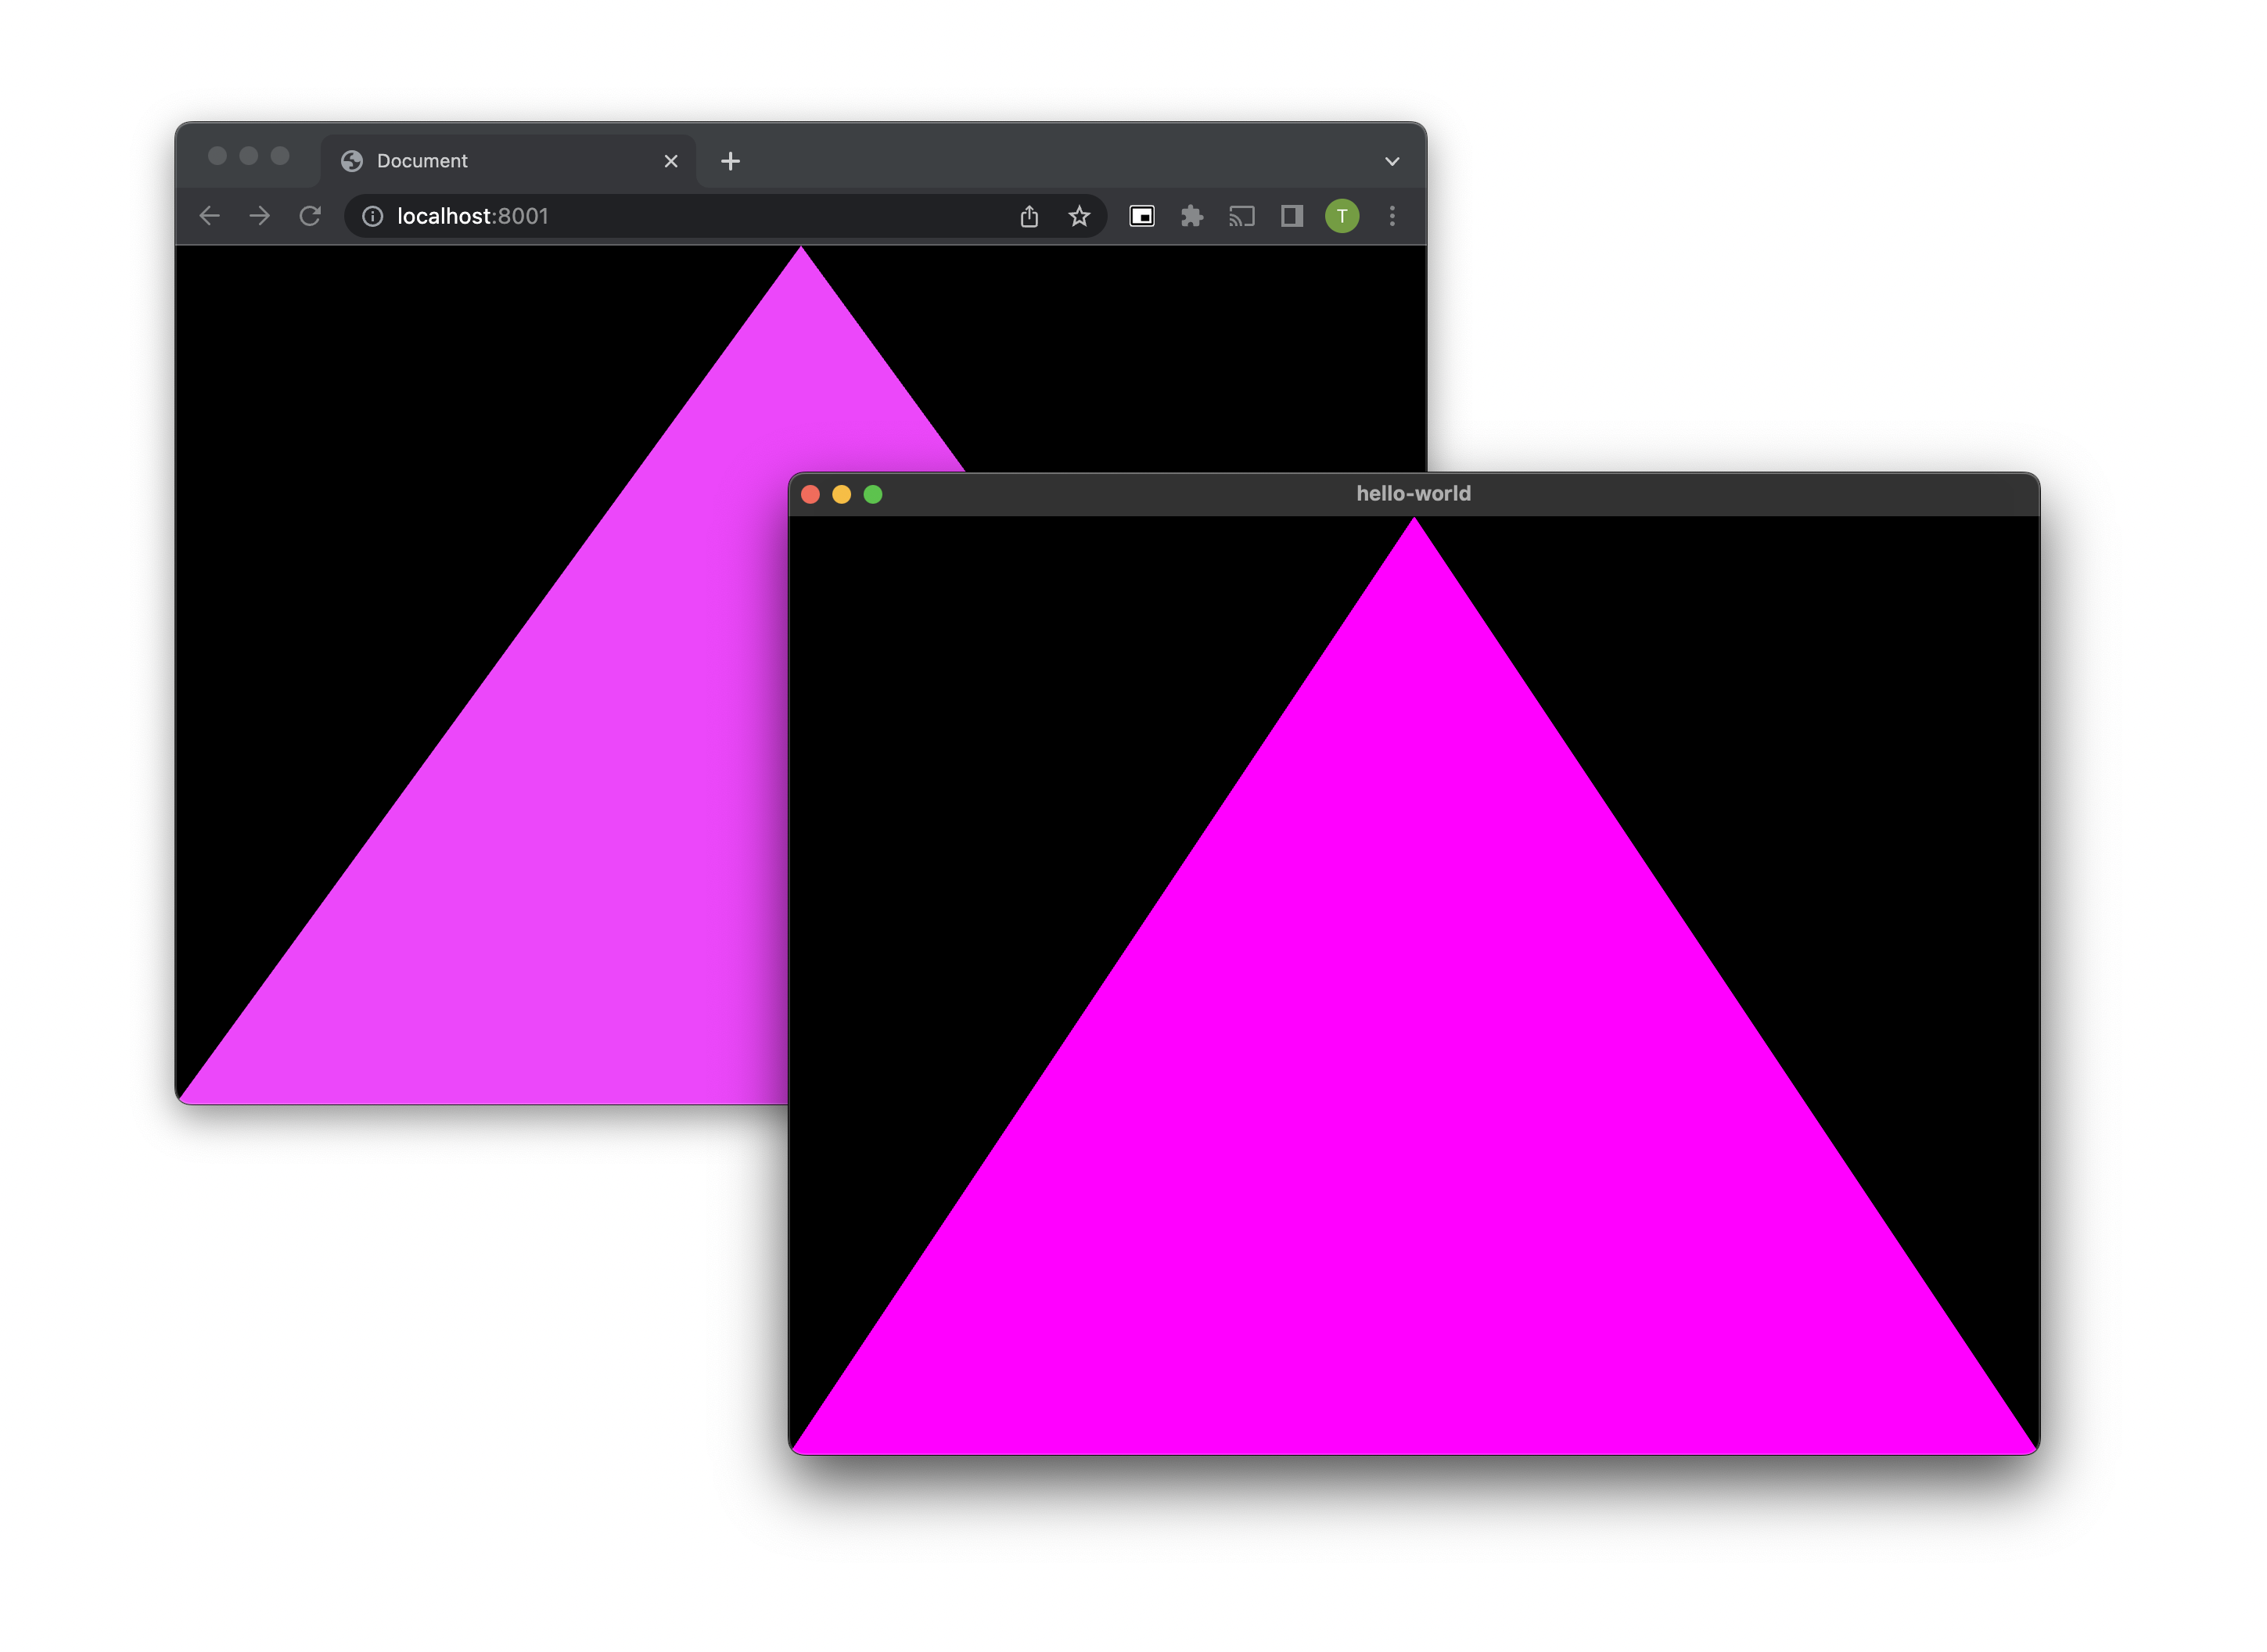 Browser and native window side by side, showing the same pink triangle.